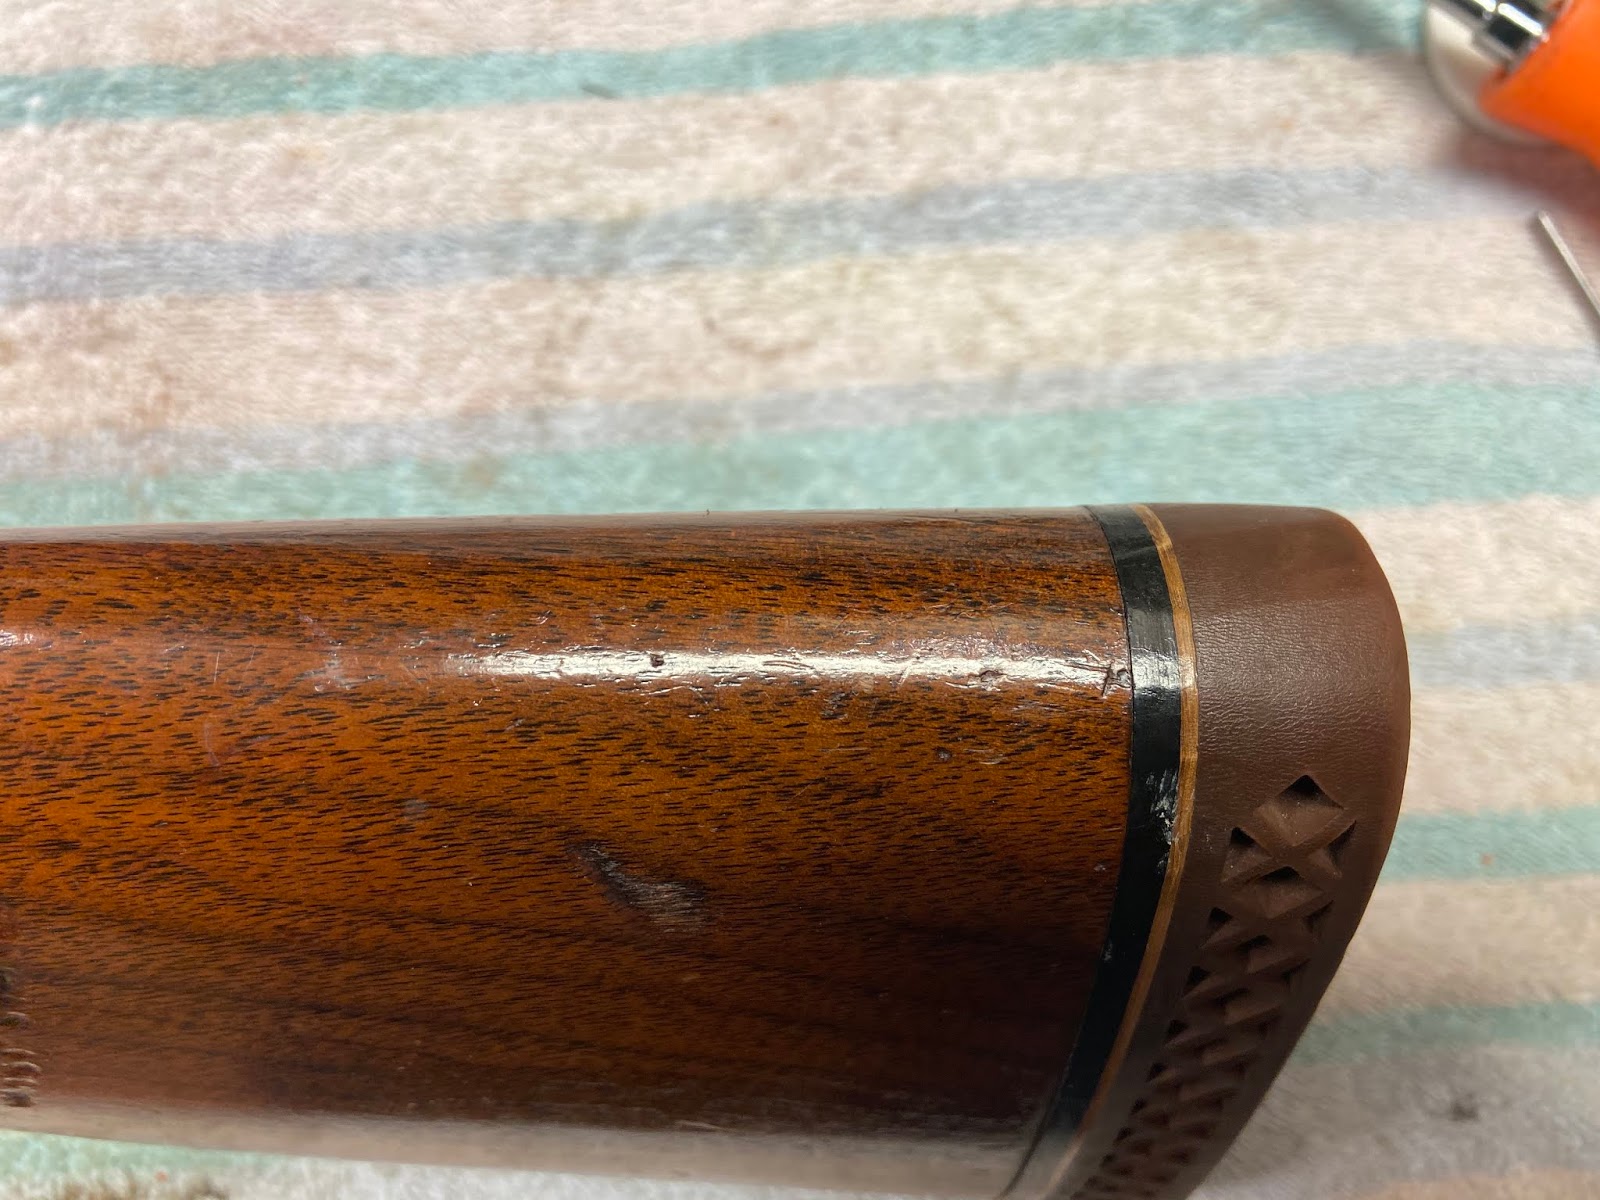 TINCANBANDIT's Gunsmithing: The Winchester Model 70 Project Part 2